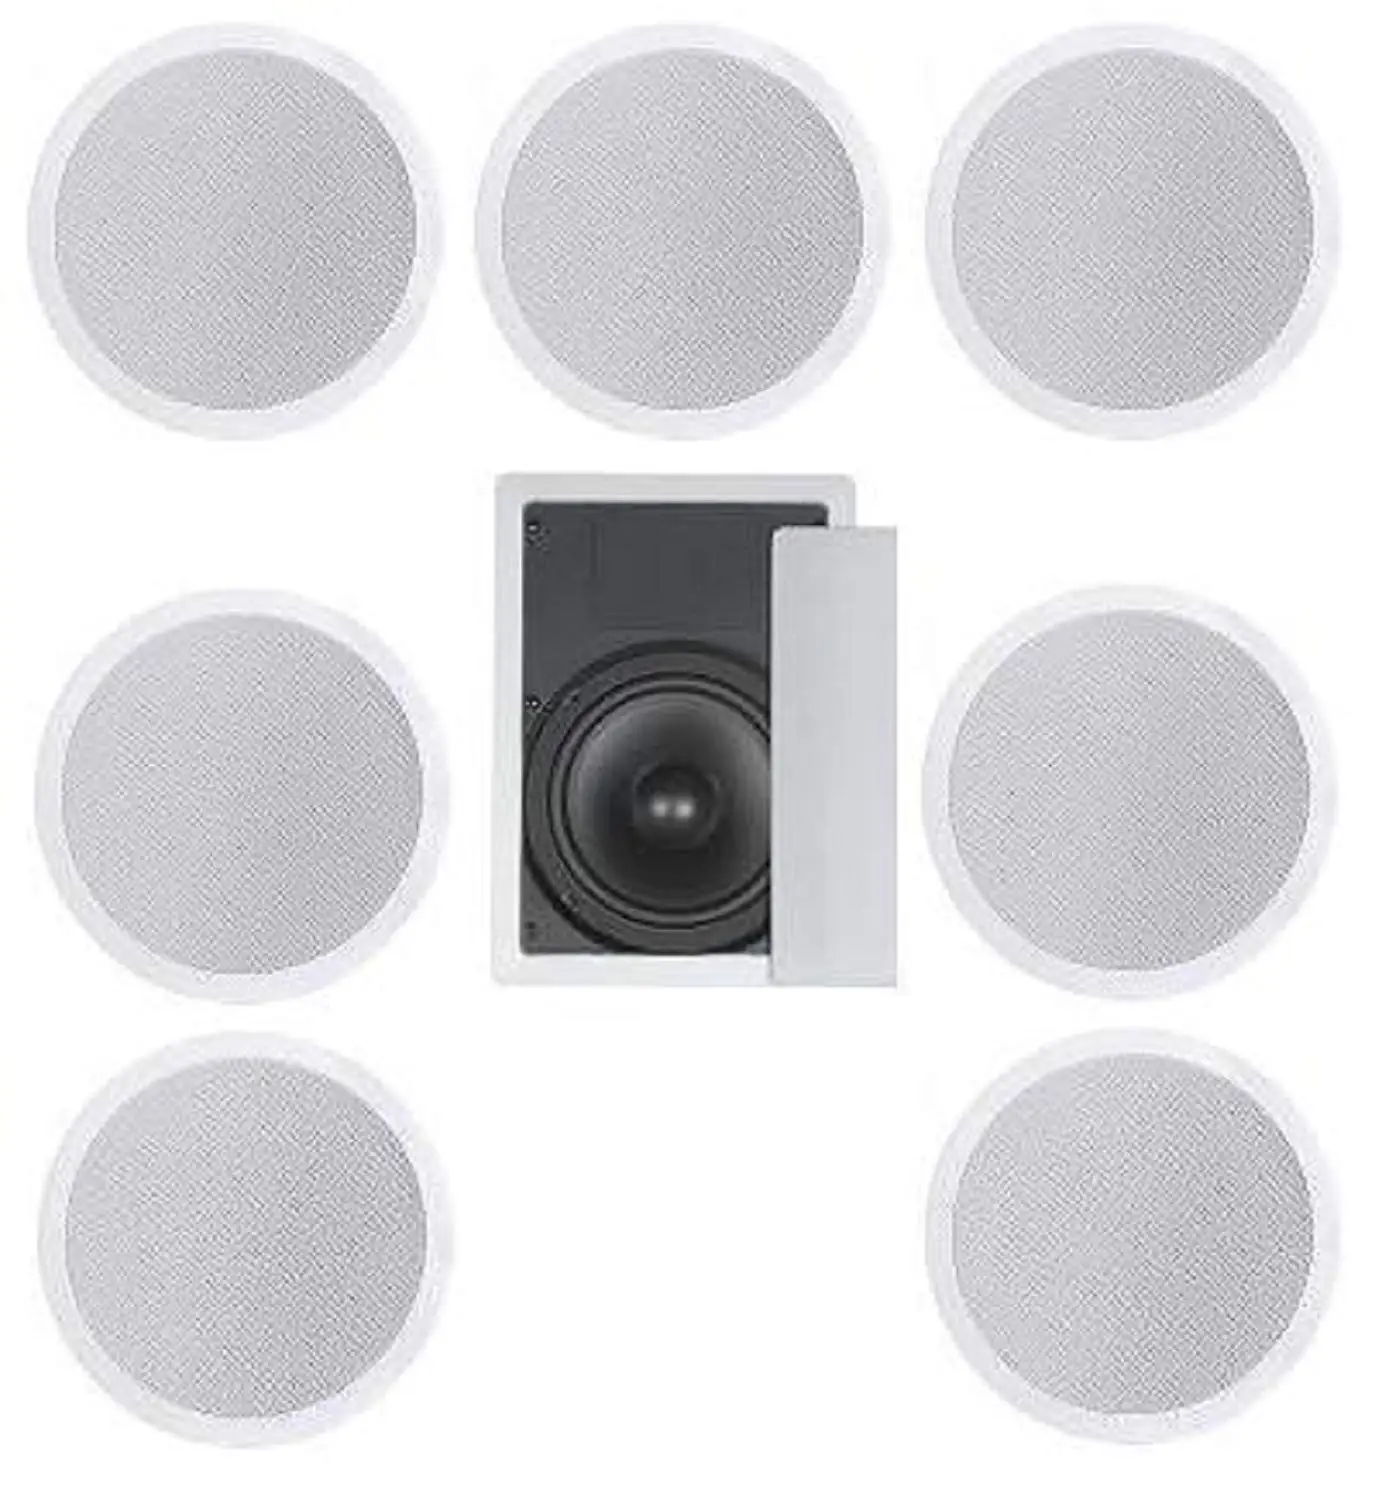 Cheap 7 1 Ceiling Speaker Placement Find 7 1 Ceiling